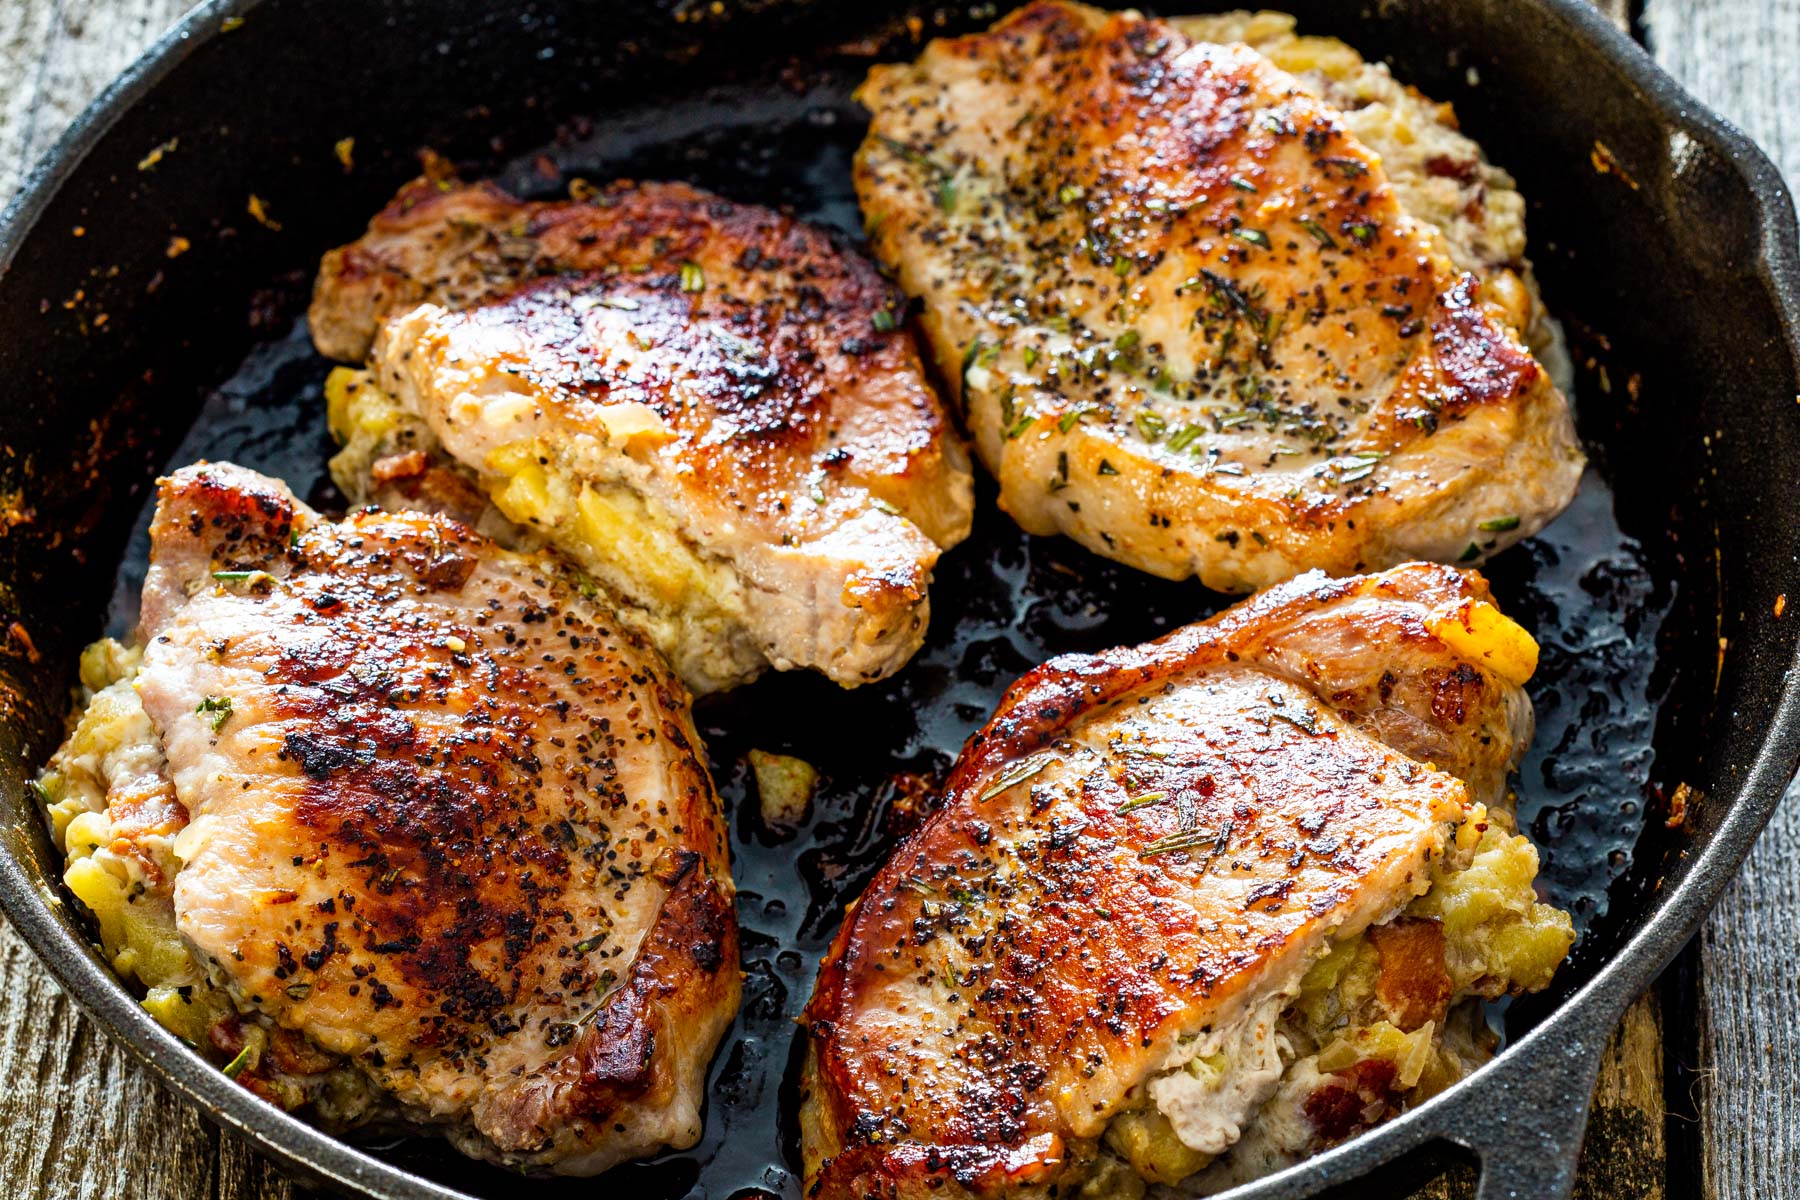 4 stuffed pork chops with apple, bacon and blue cheese in a black skillet